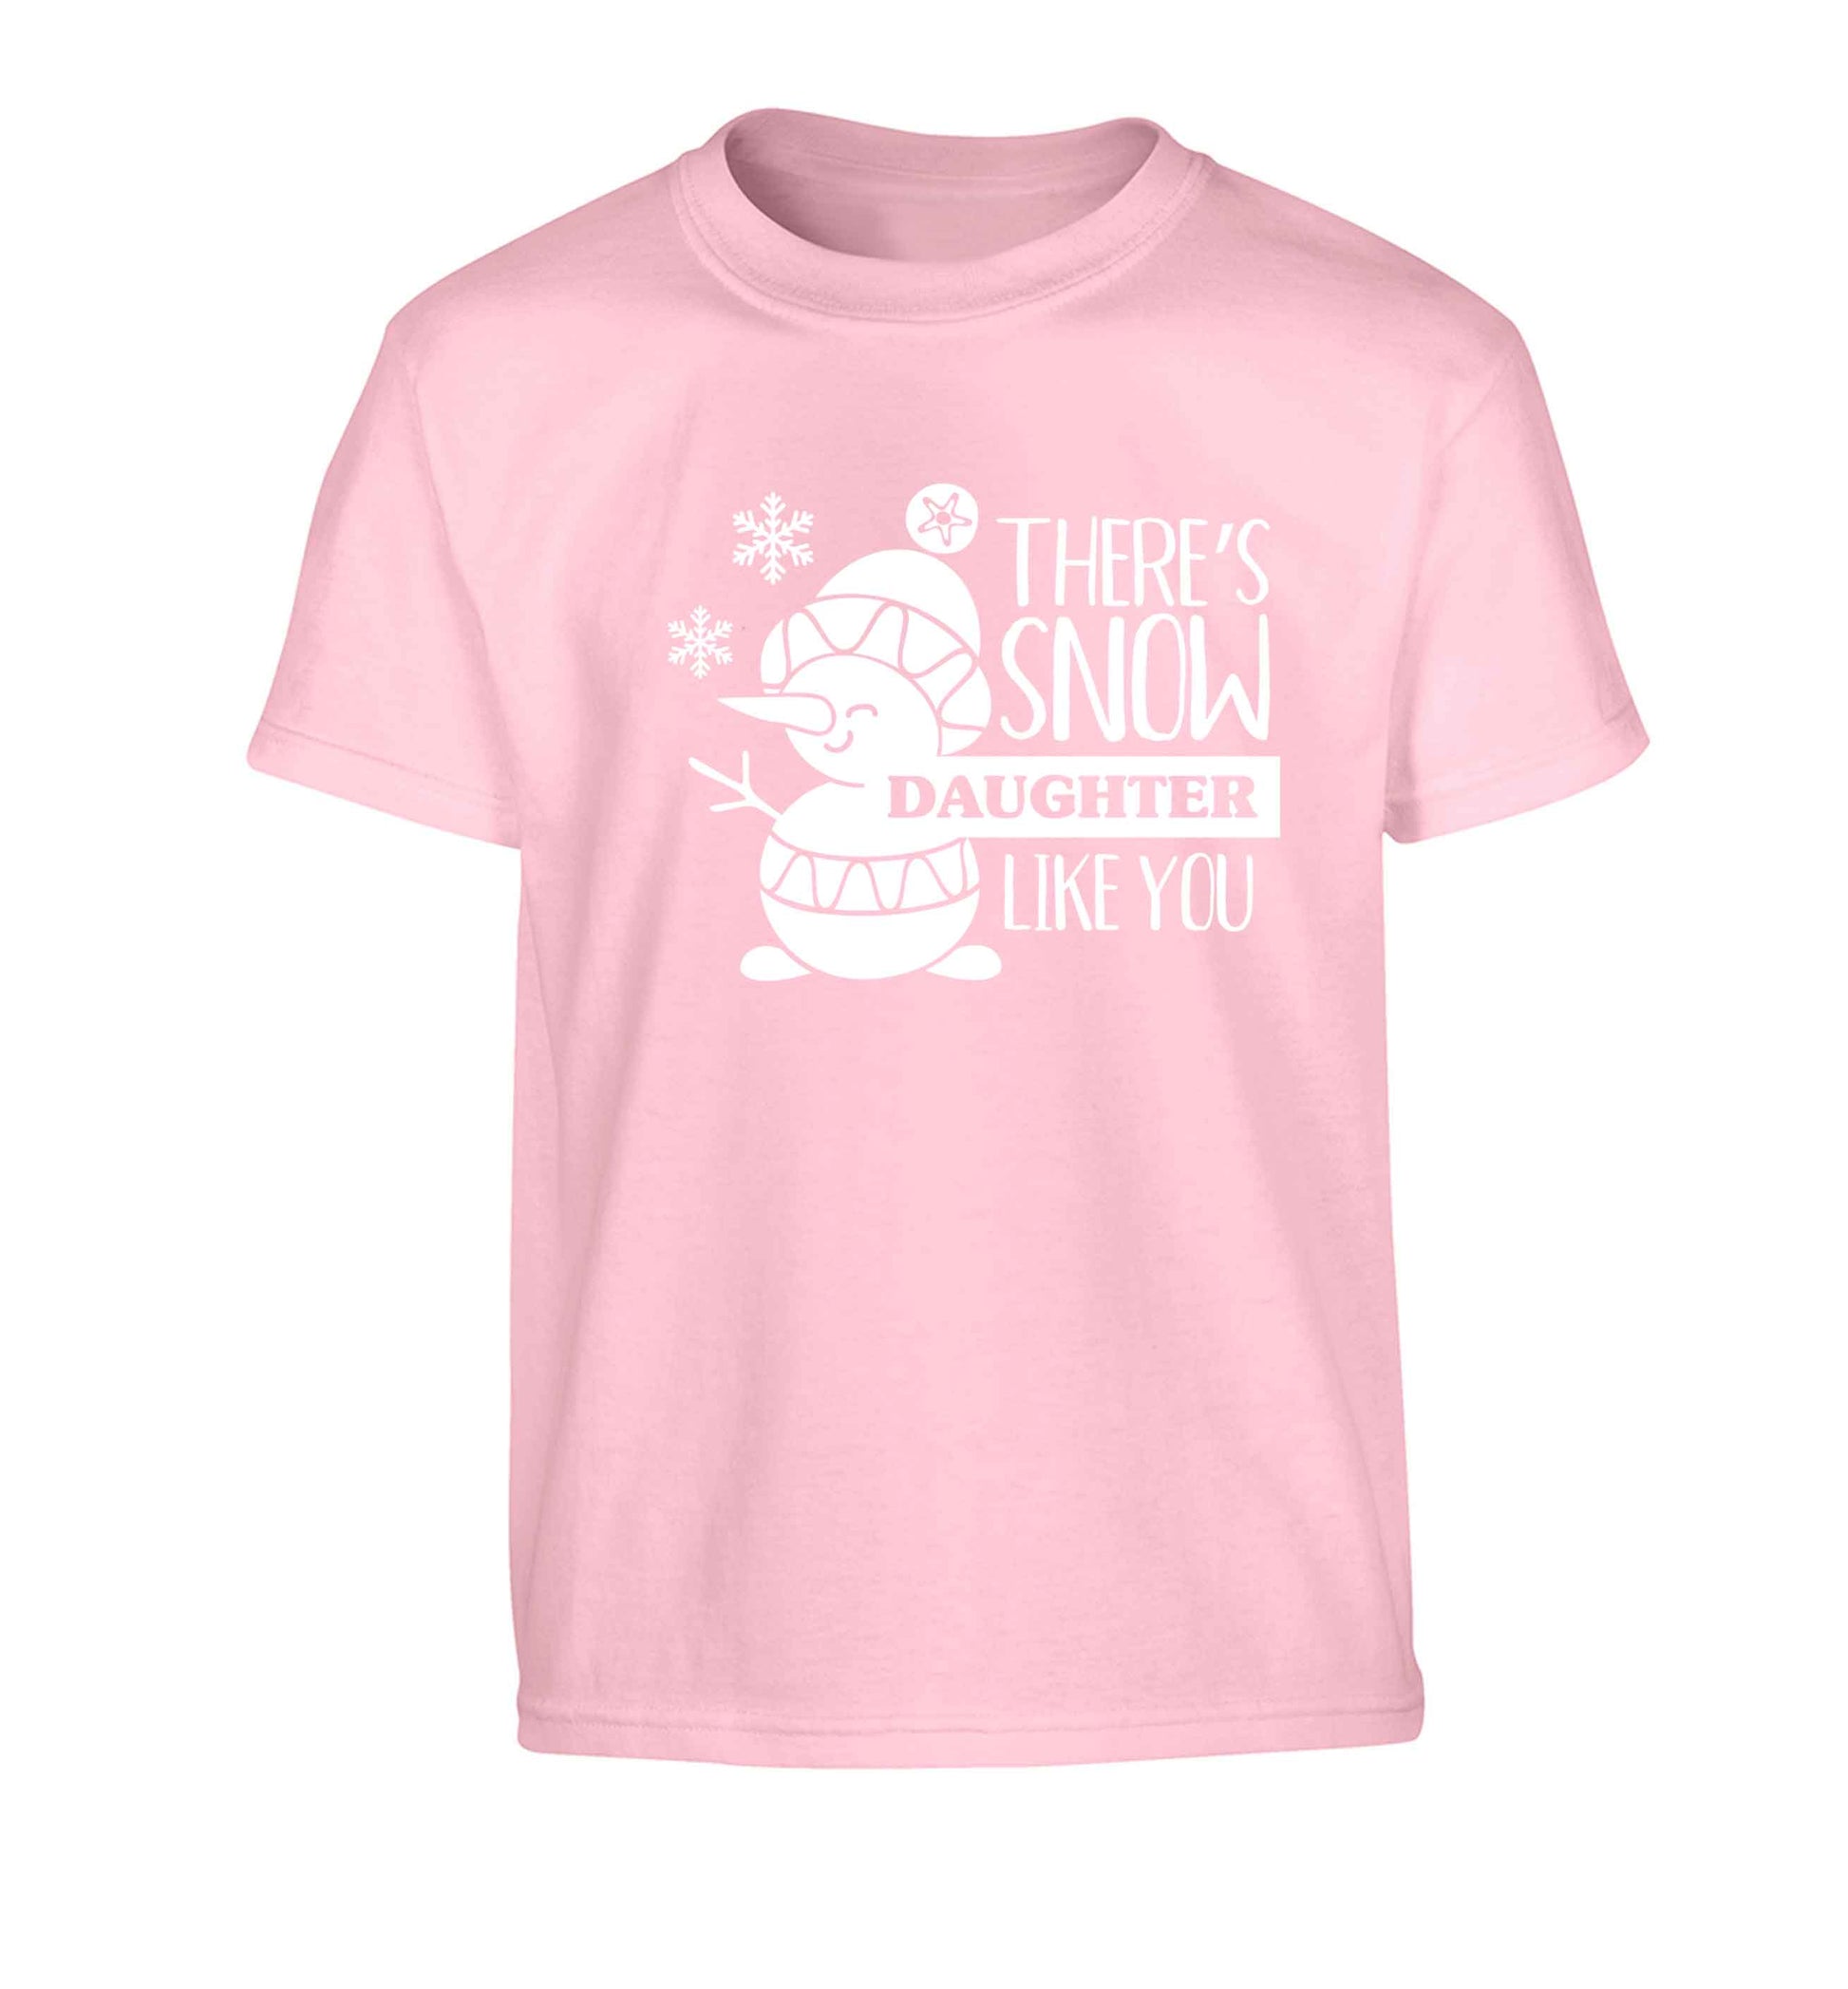 There's snow daughter like you Children's light pink Tshirt 12-13 Years